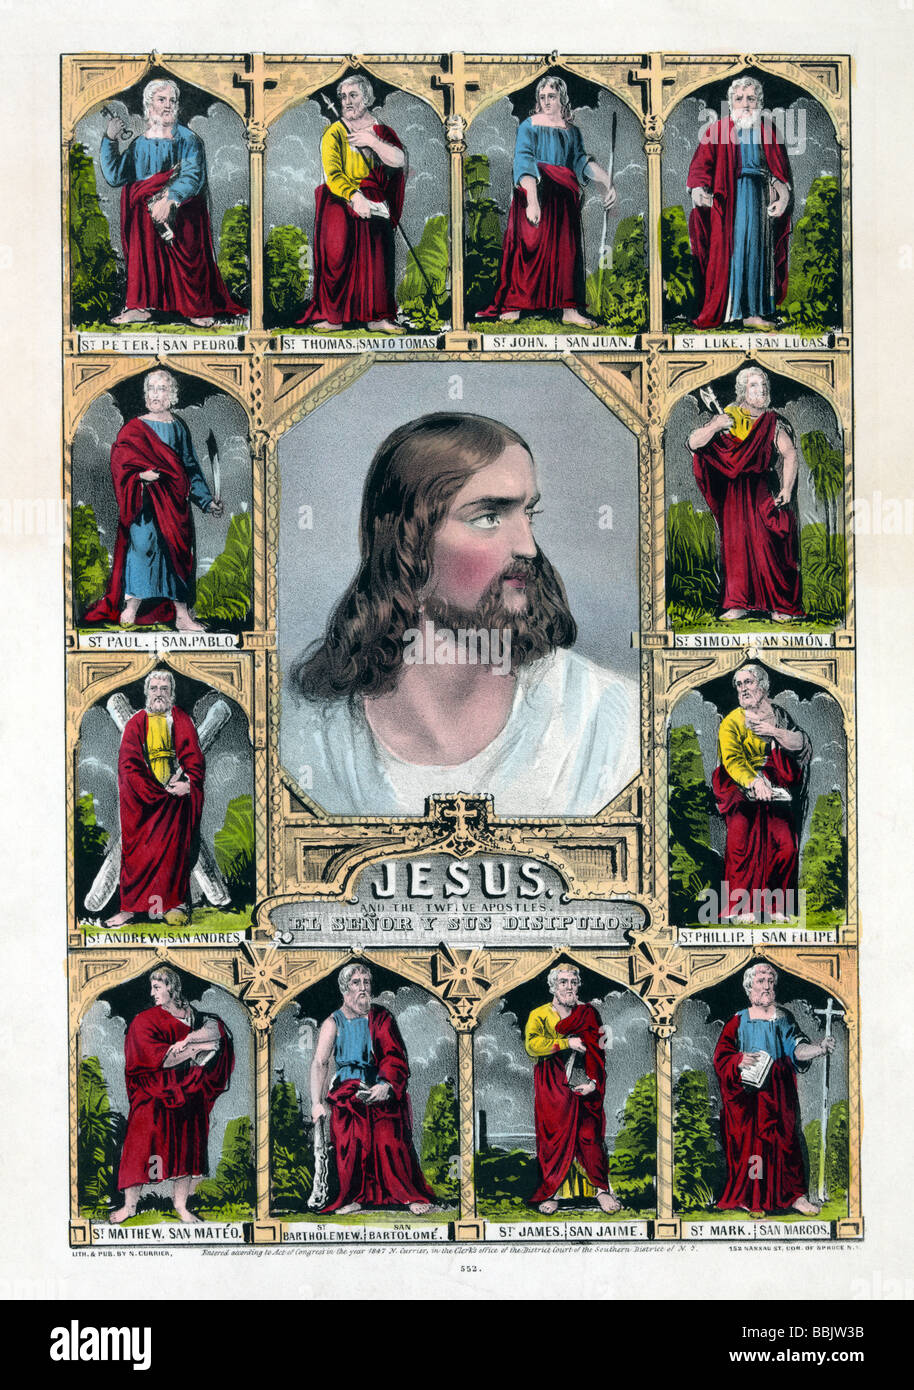 Lithograph print published circa 1847 by N Currier entitled “Jesus and the Twelve Apostles”. Stock Photo